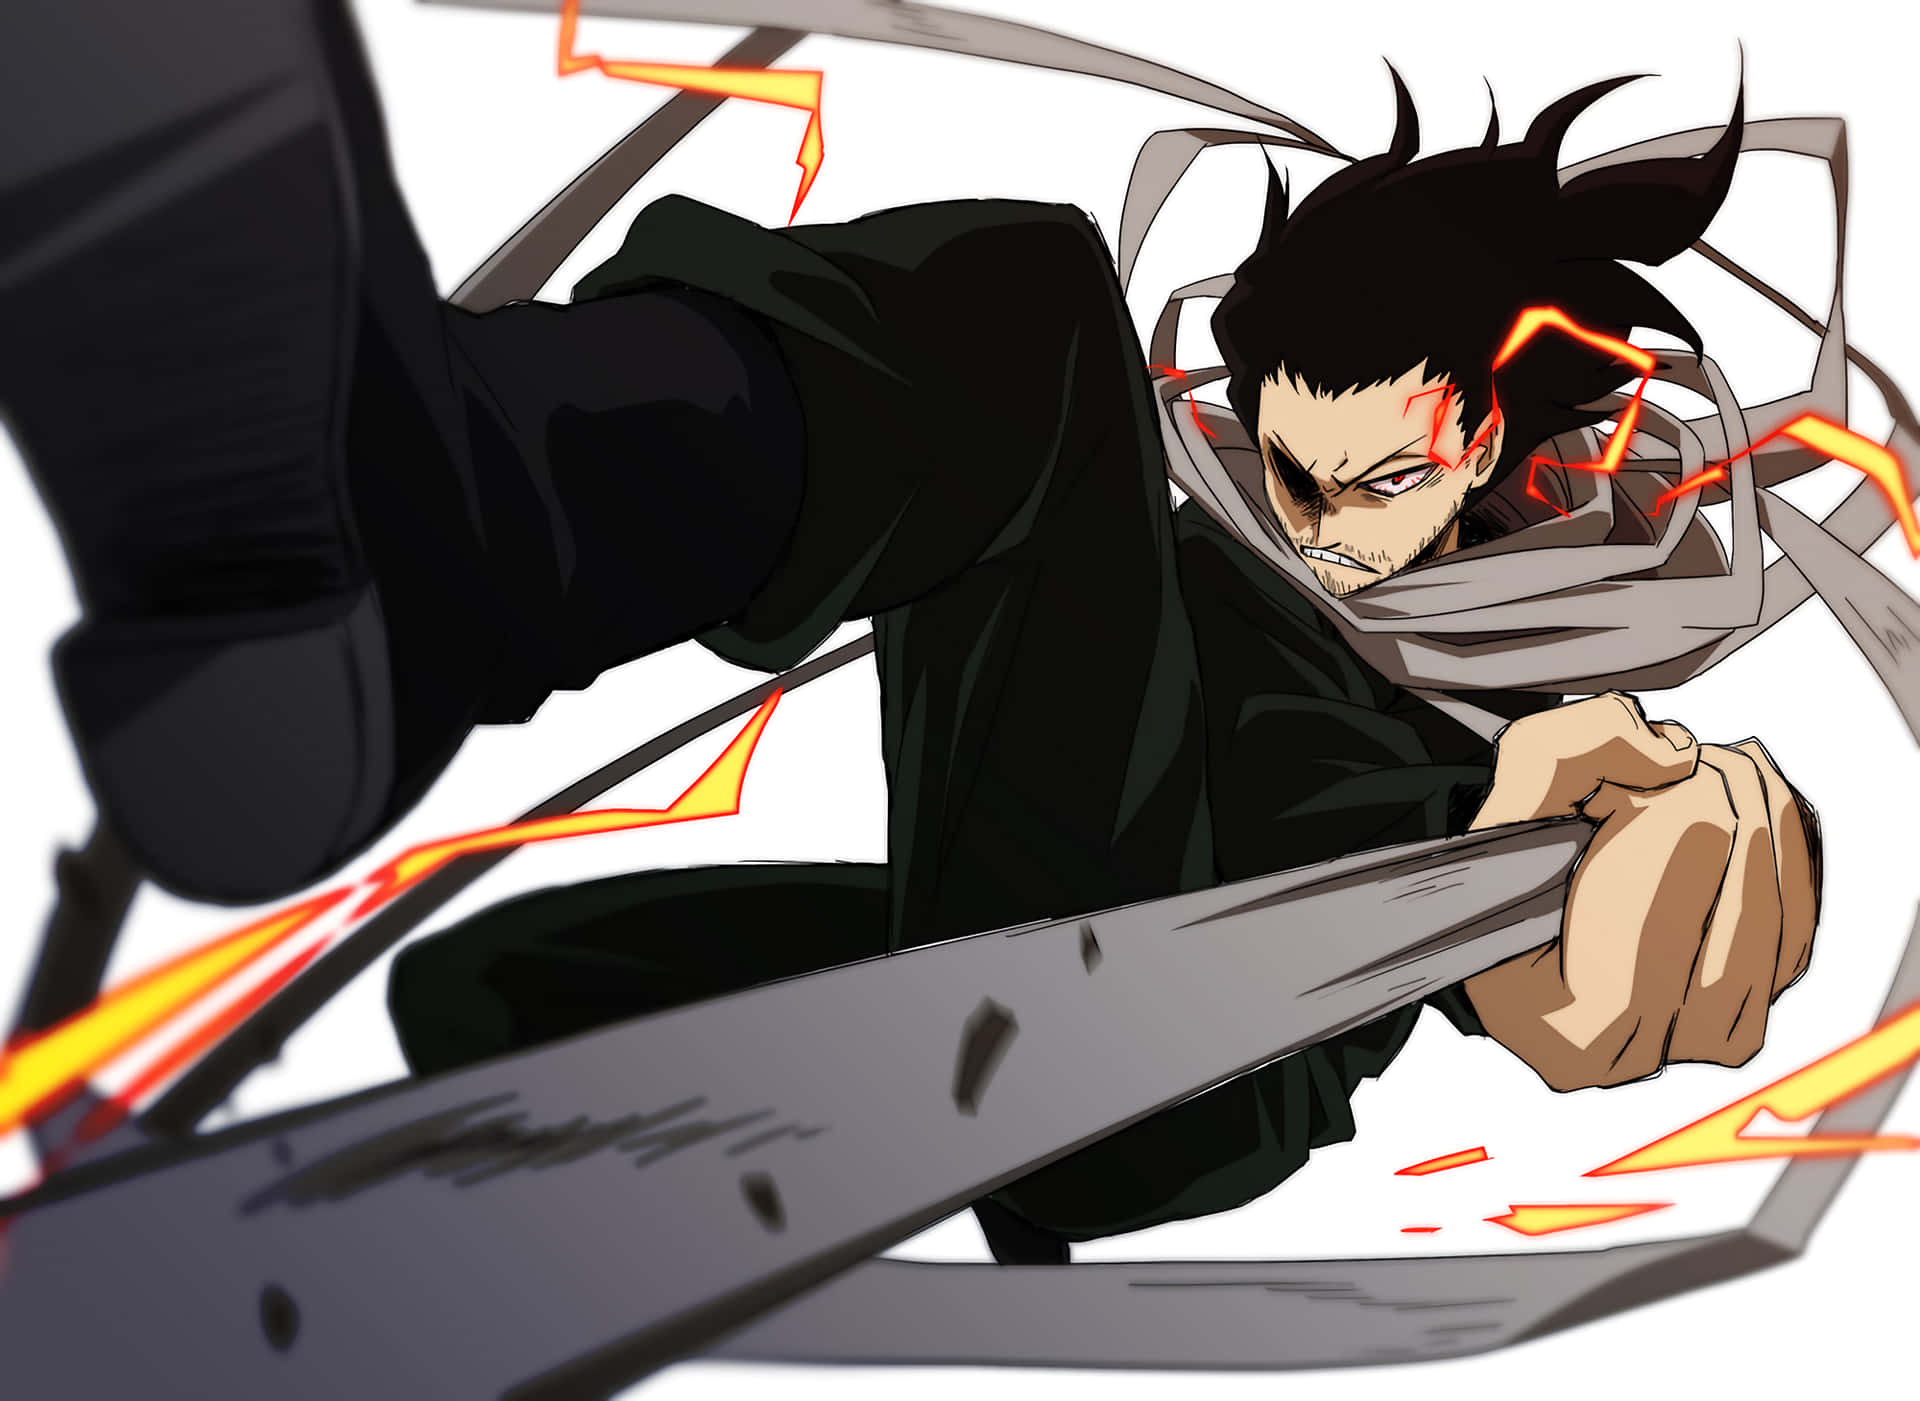 "People may call me erase, but I won't let anything stand in the way of my mission." - Shota Aizawa Wallpaper